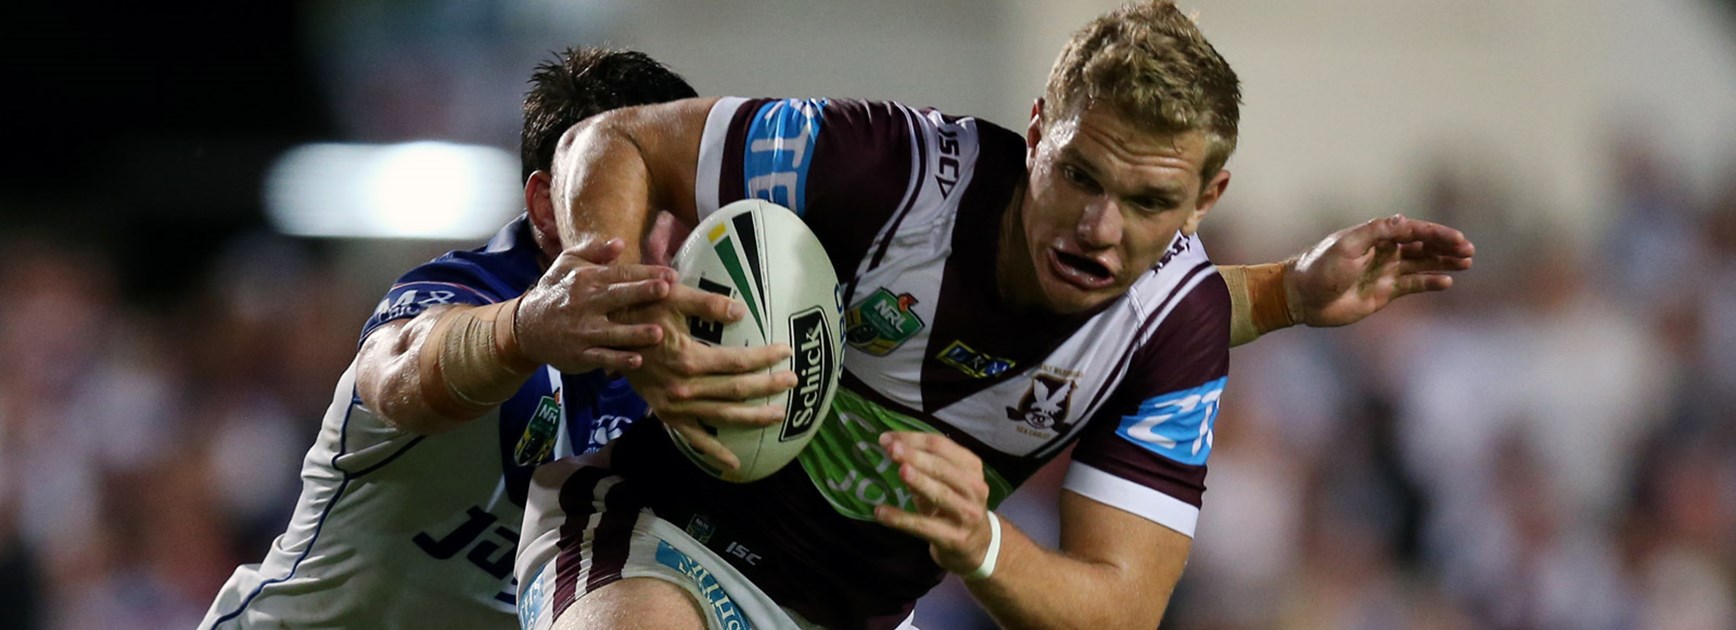 Tom Trbojevic started at fullback for Manly in their Round 1 loss to the Bulldogs.